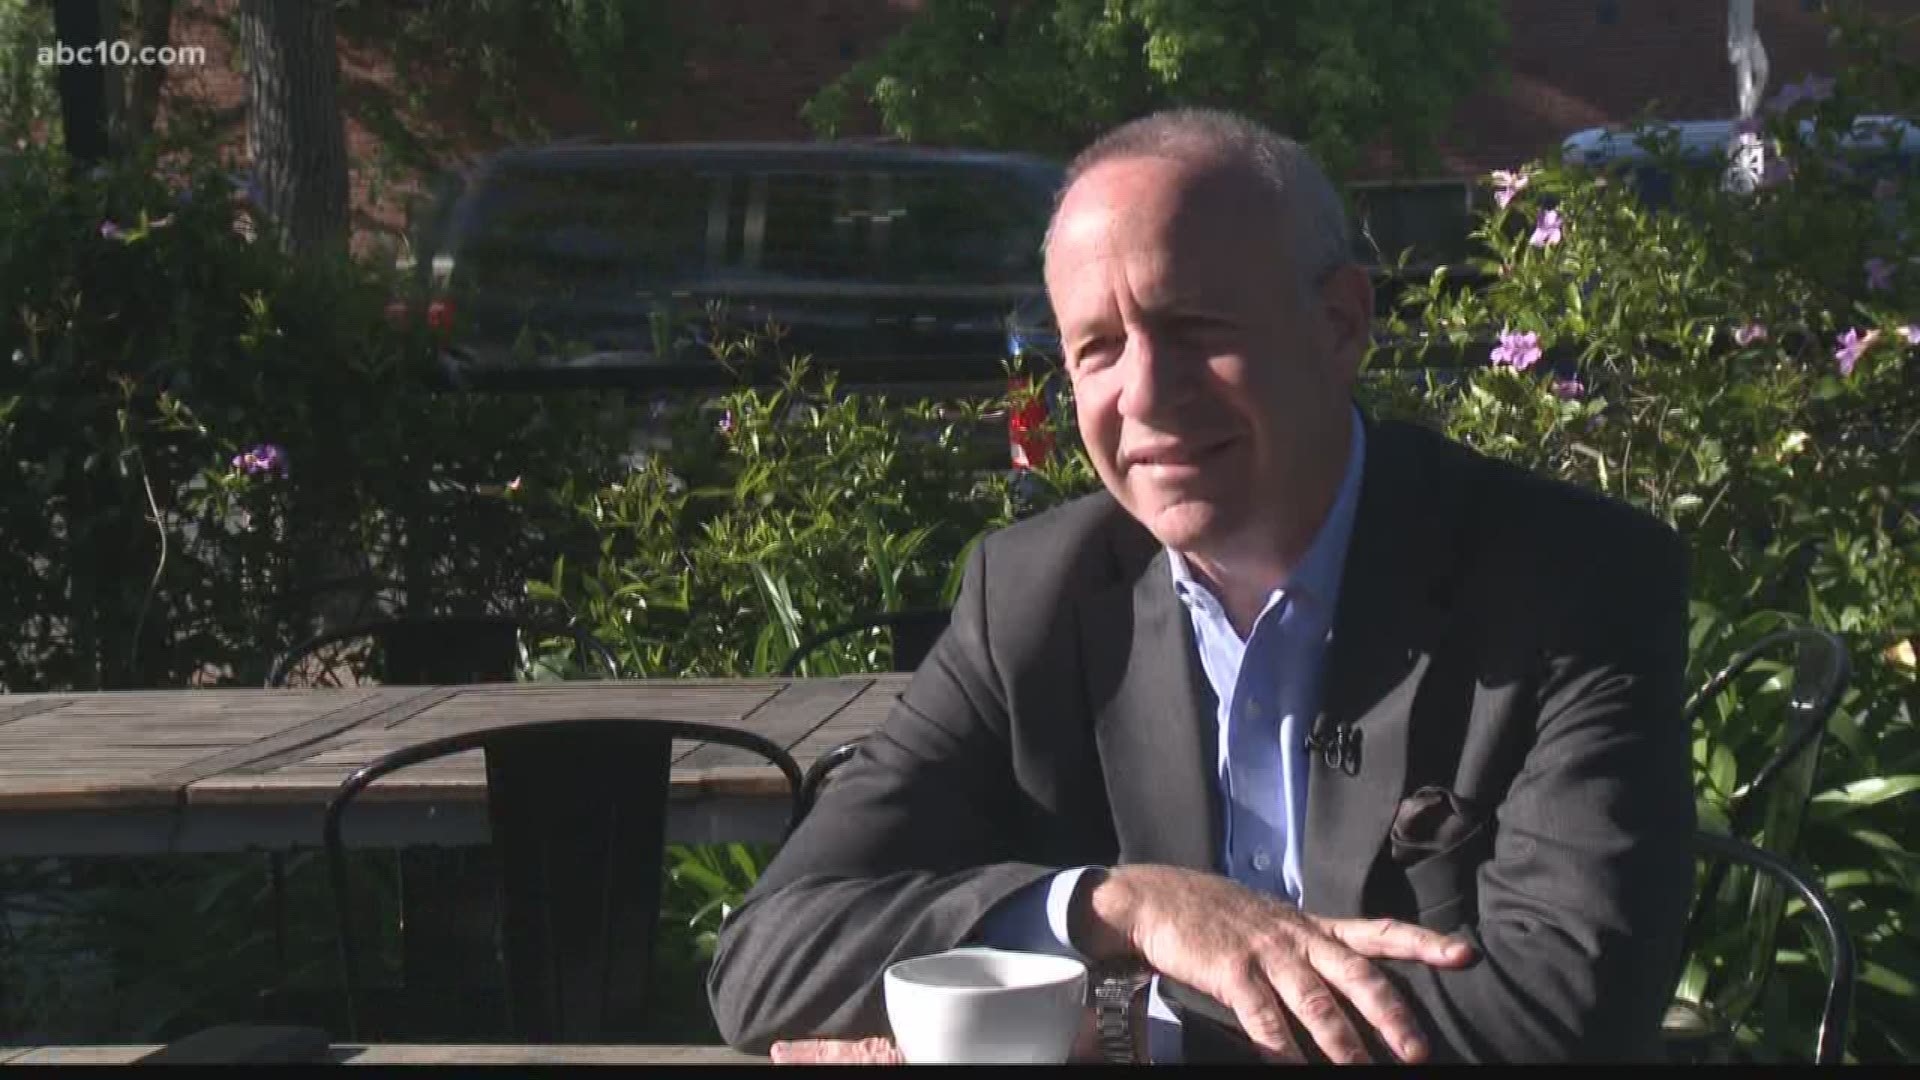 Walt Gray sat down with Mayor Steinberg to talk about issues currently facing the city.